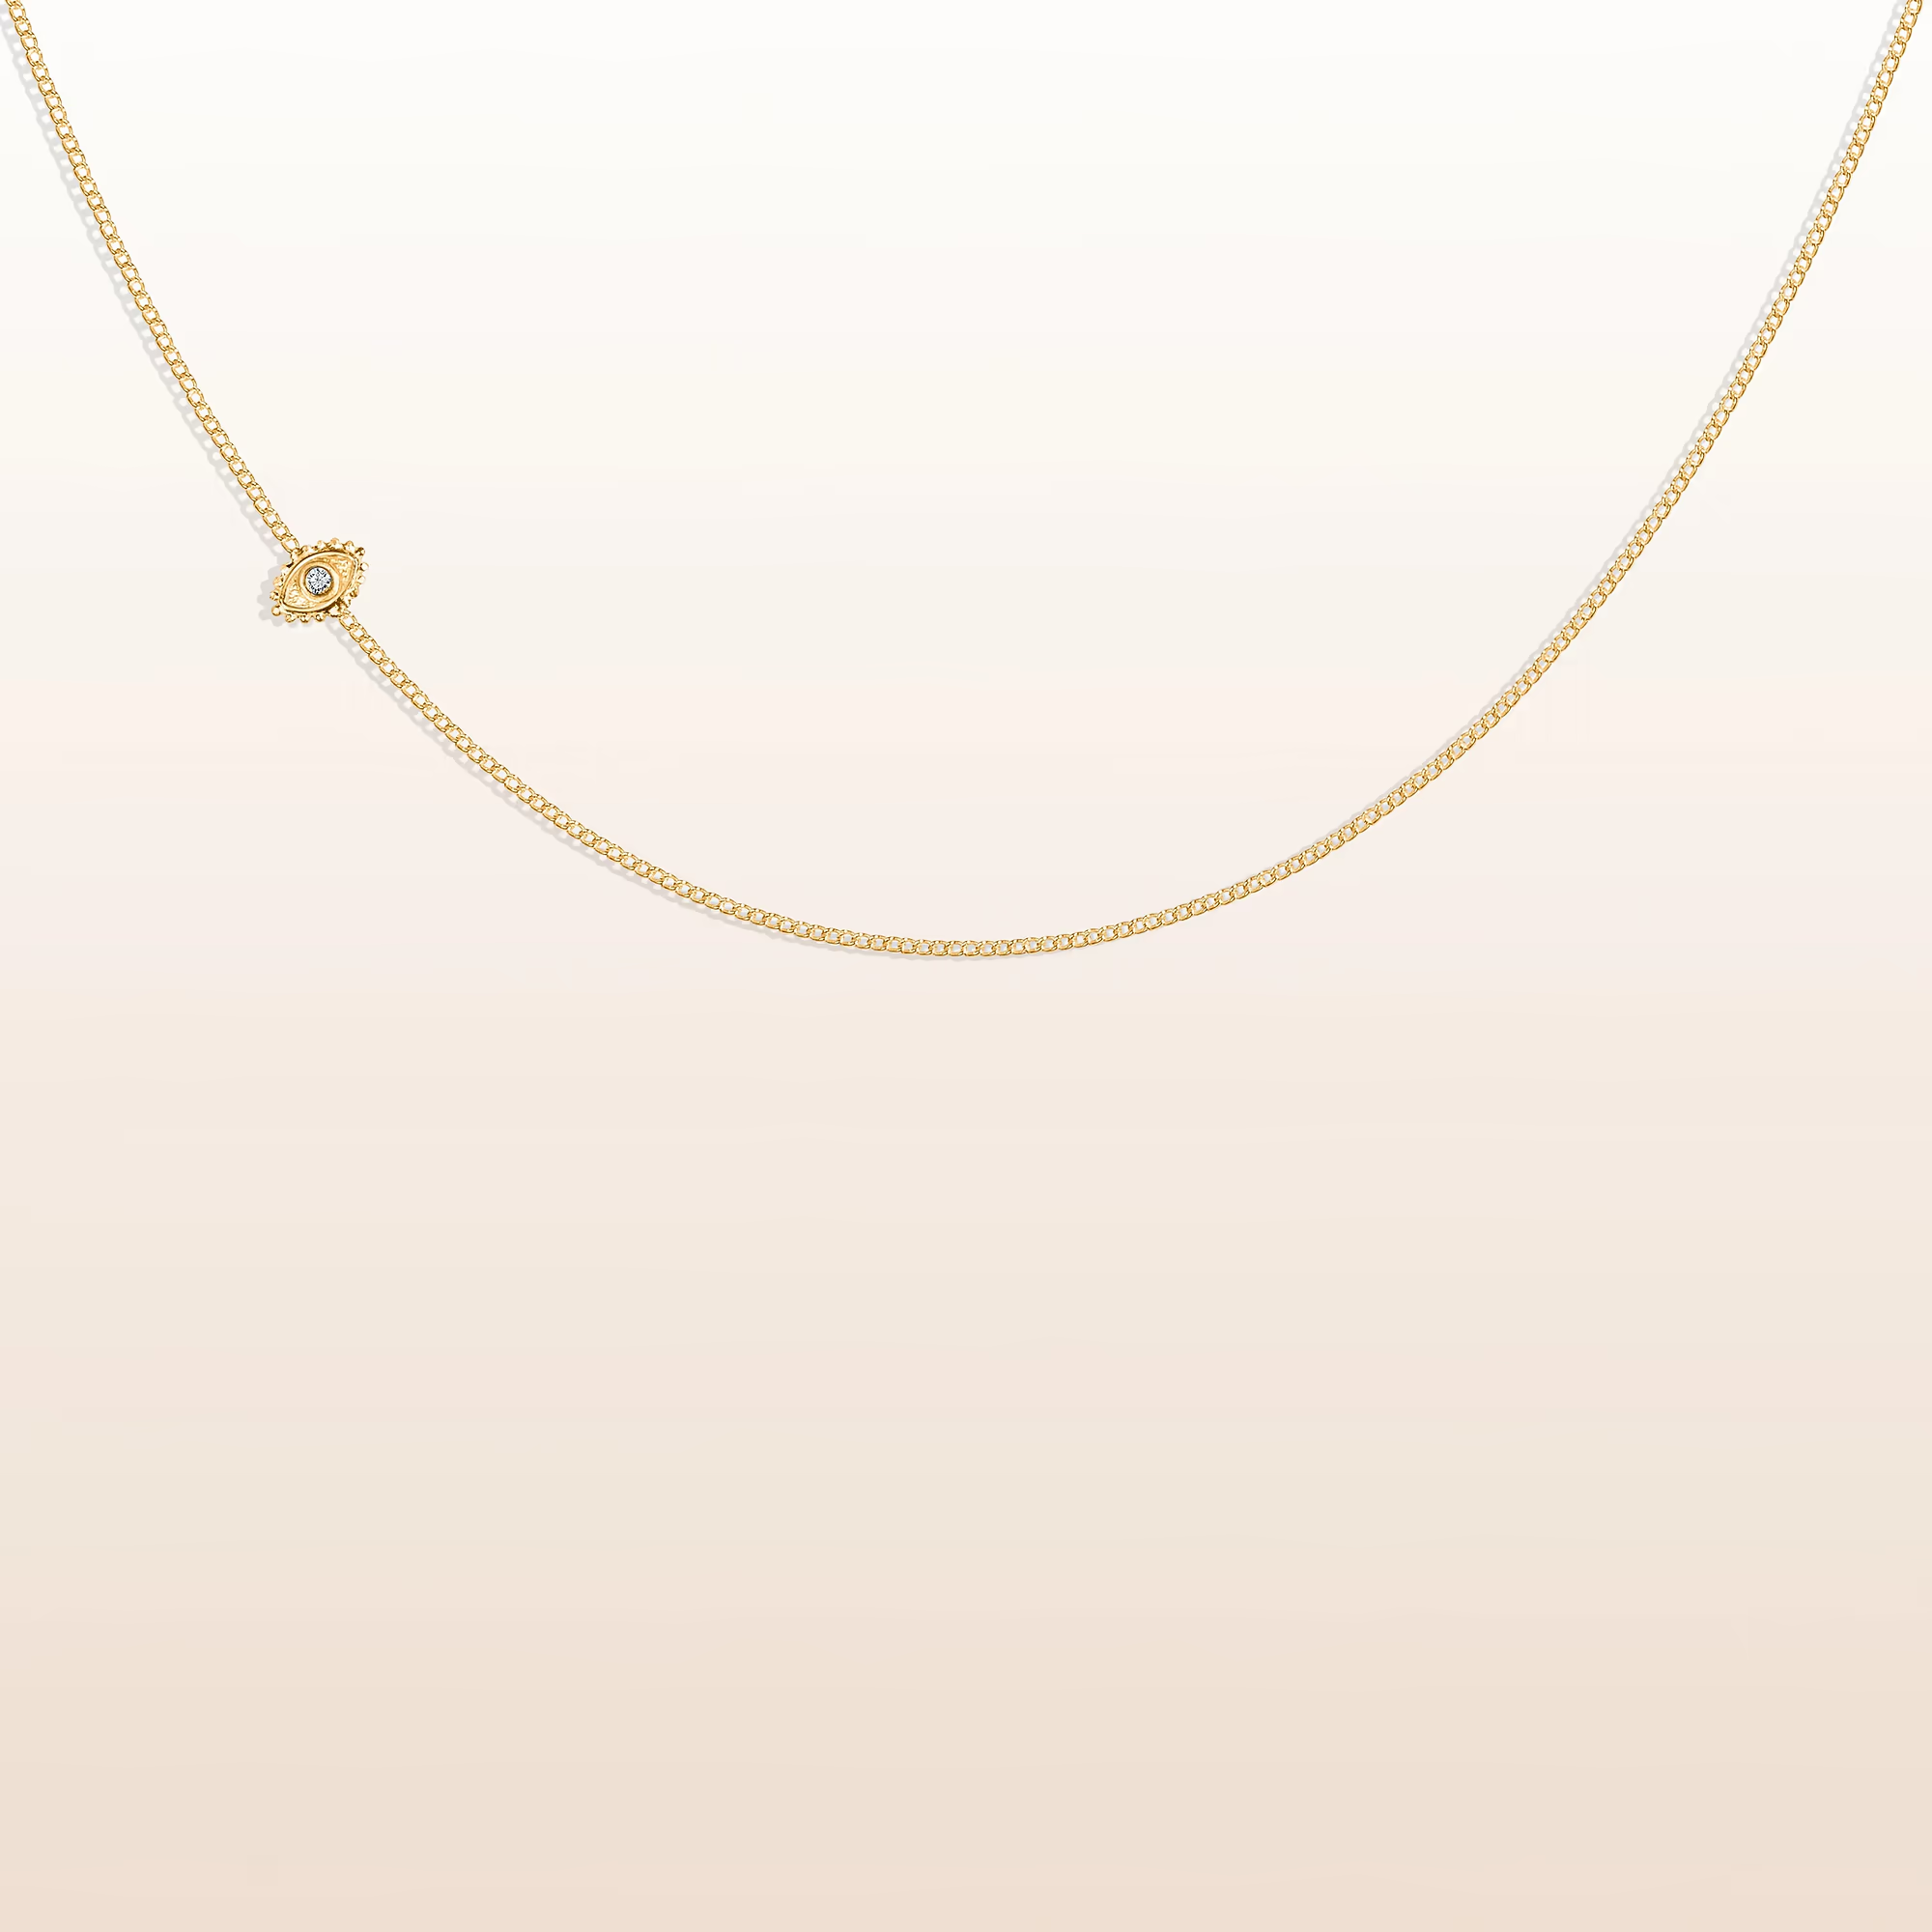 Lucklumen Gold Plated  Necklace  Luck and Safeguarded Spirit